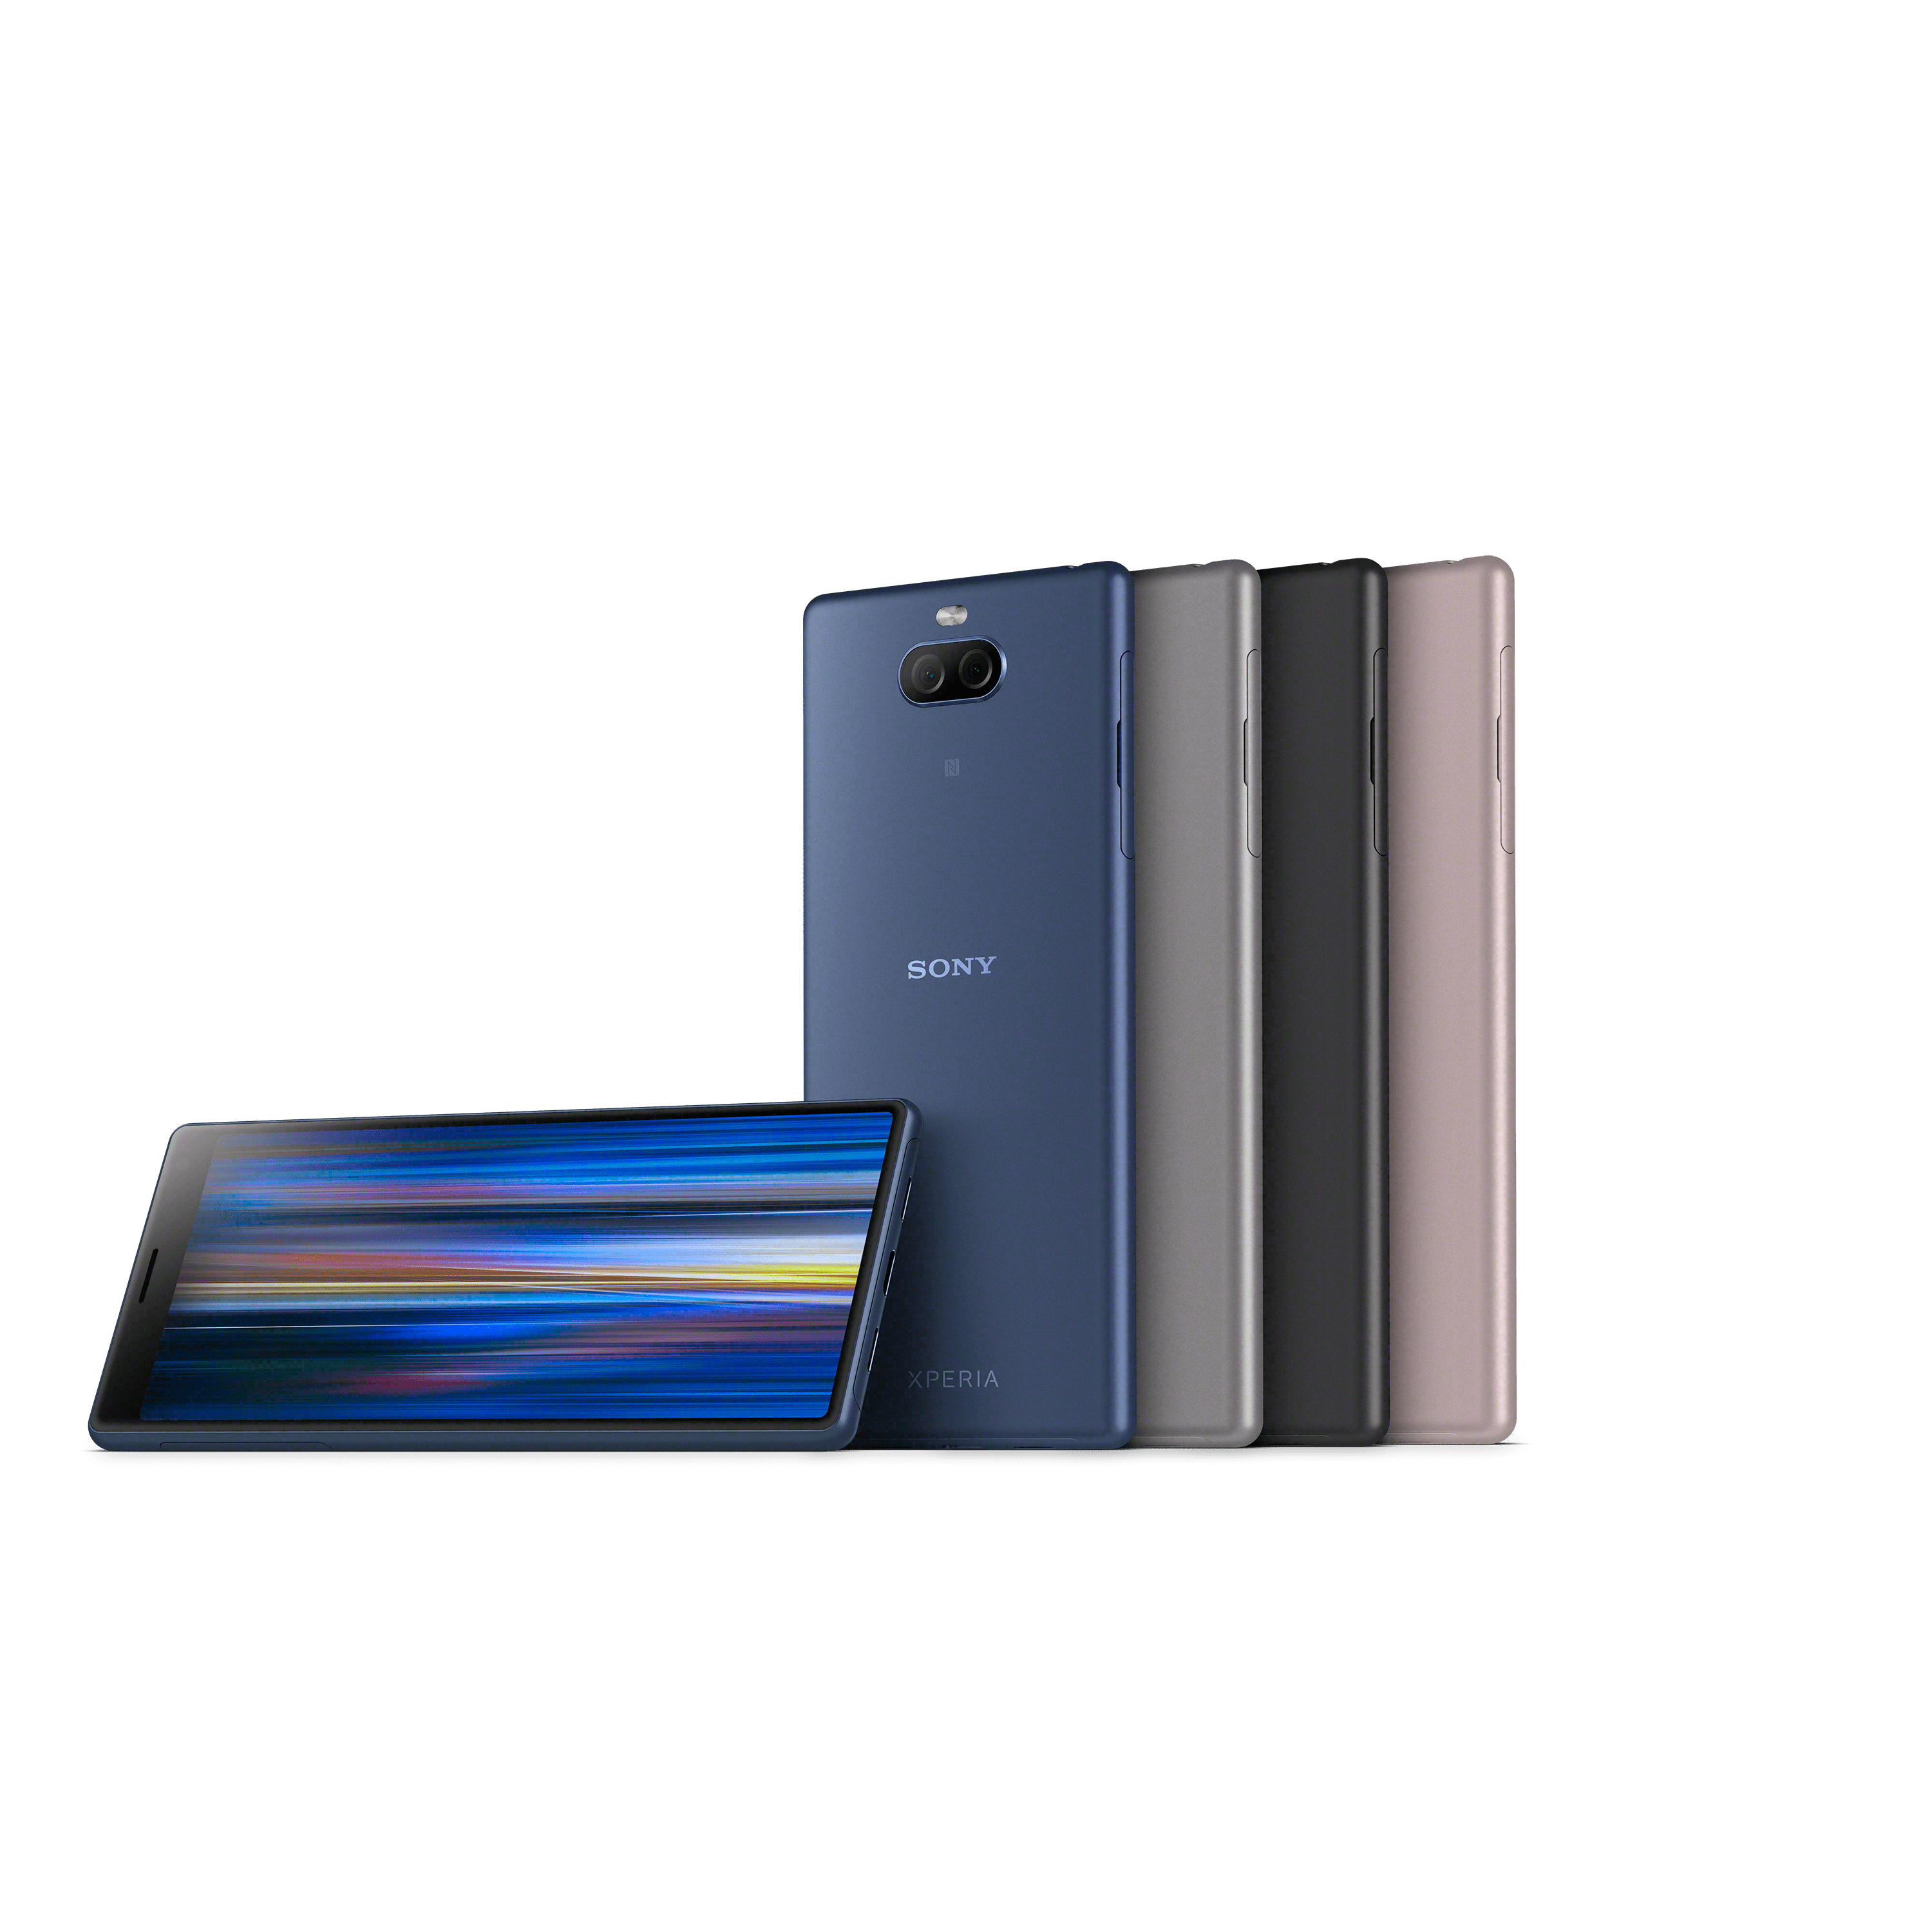 Meet the Makers: The team behind the sleek and slender design of the Xperia 10 and Xperia 10 Plus